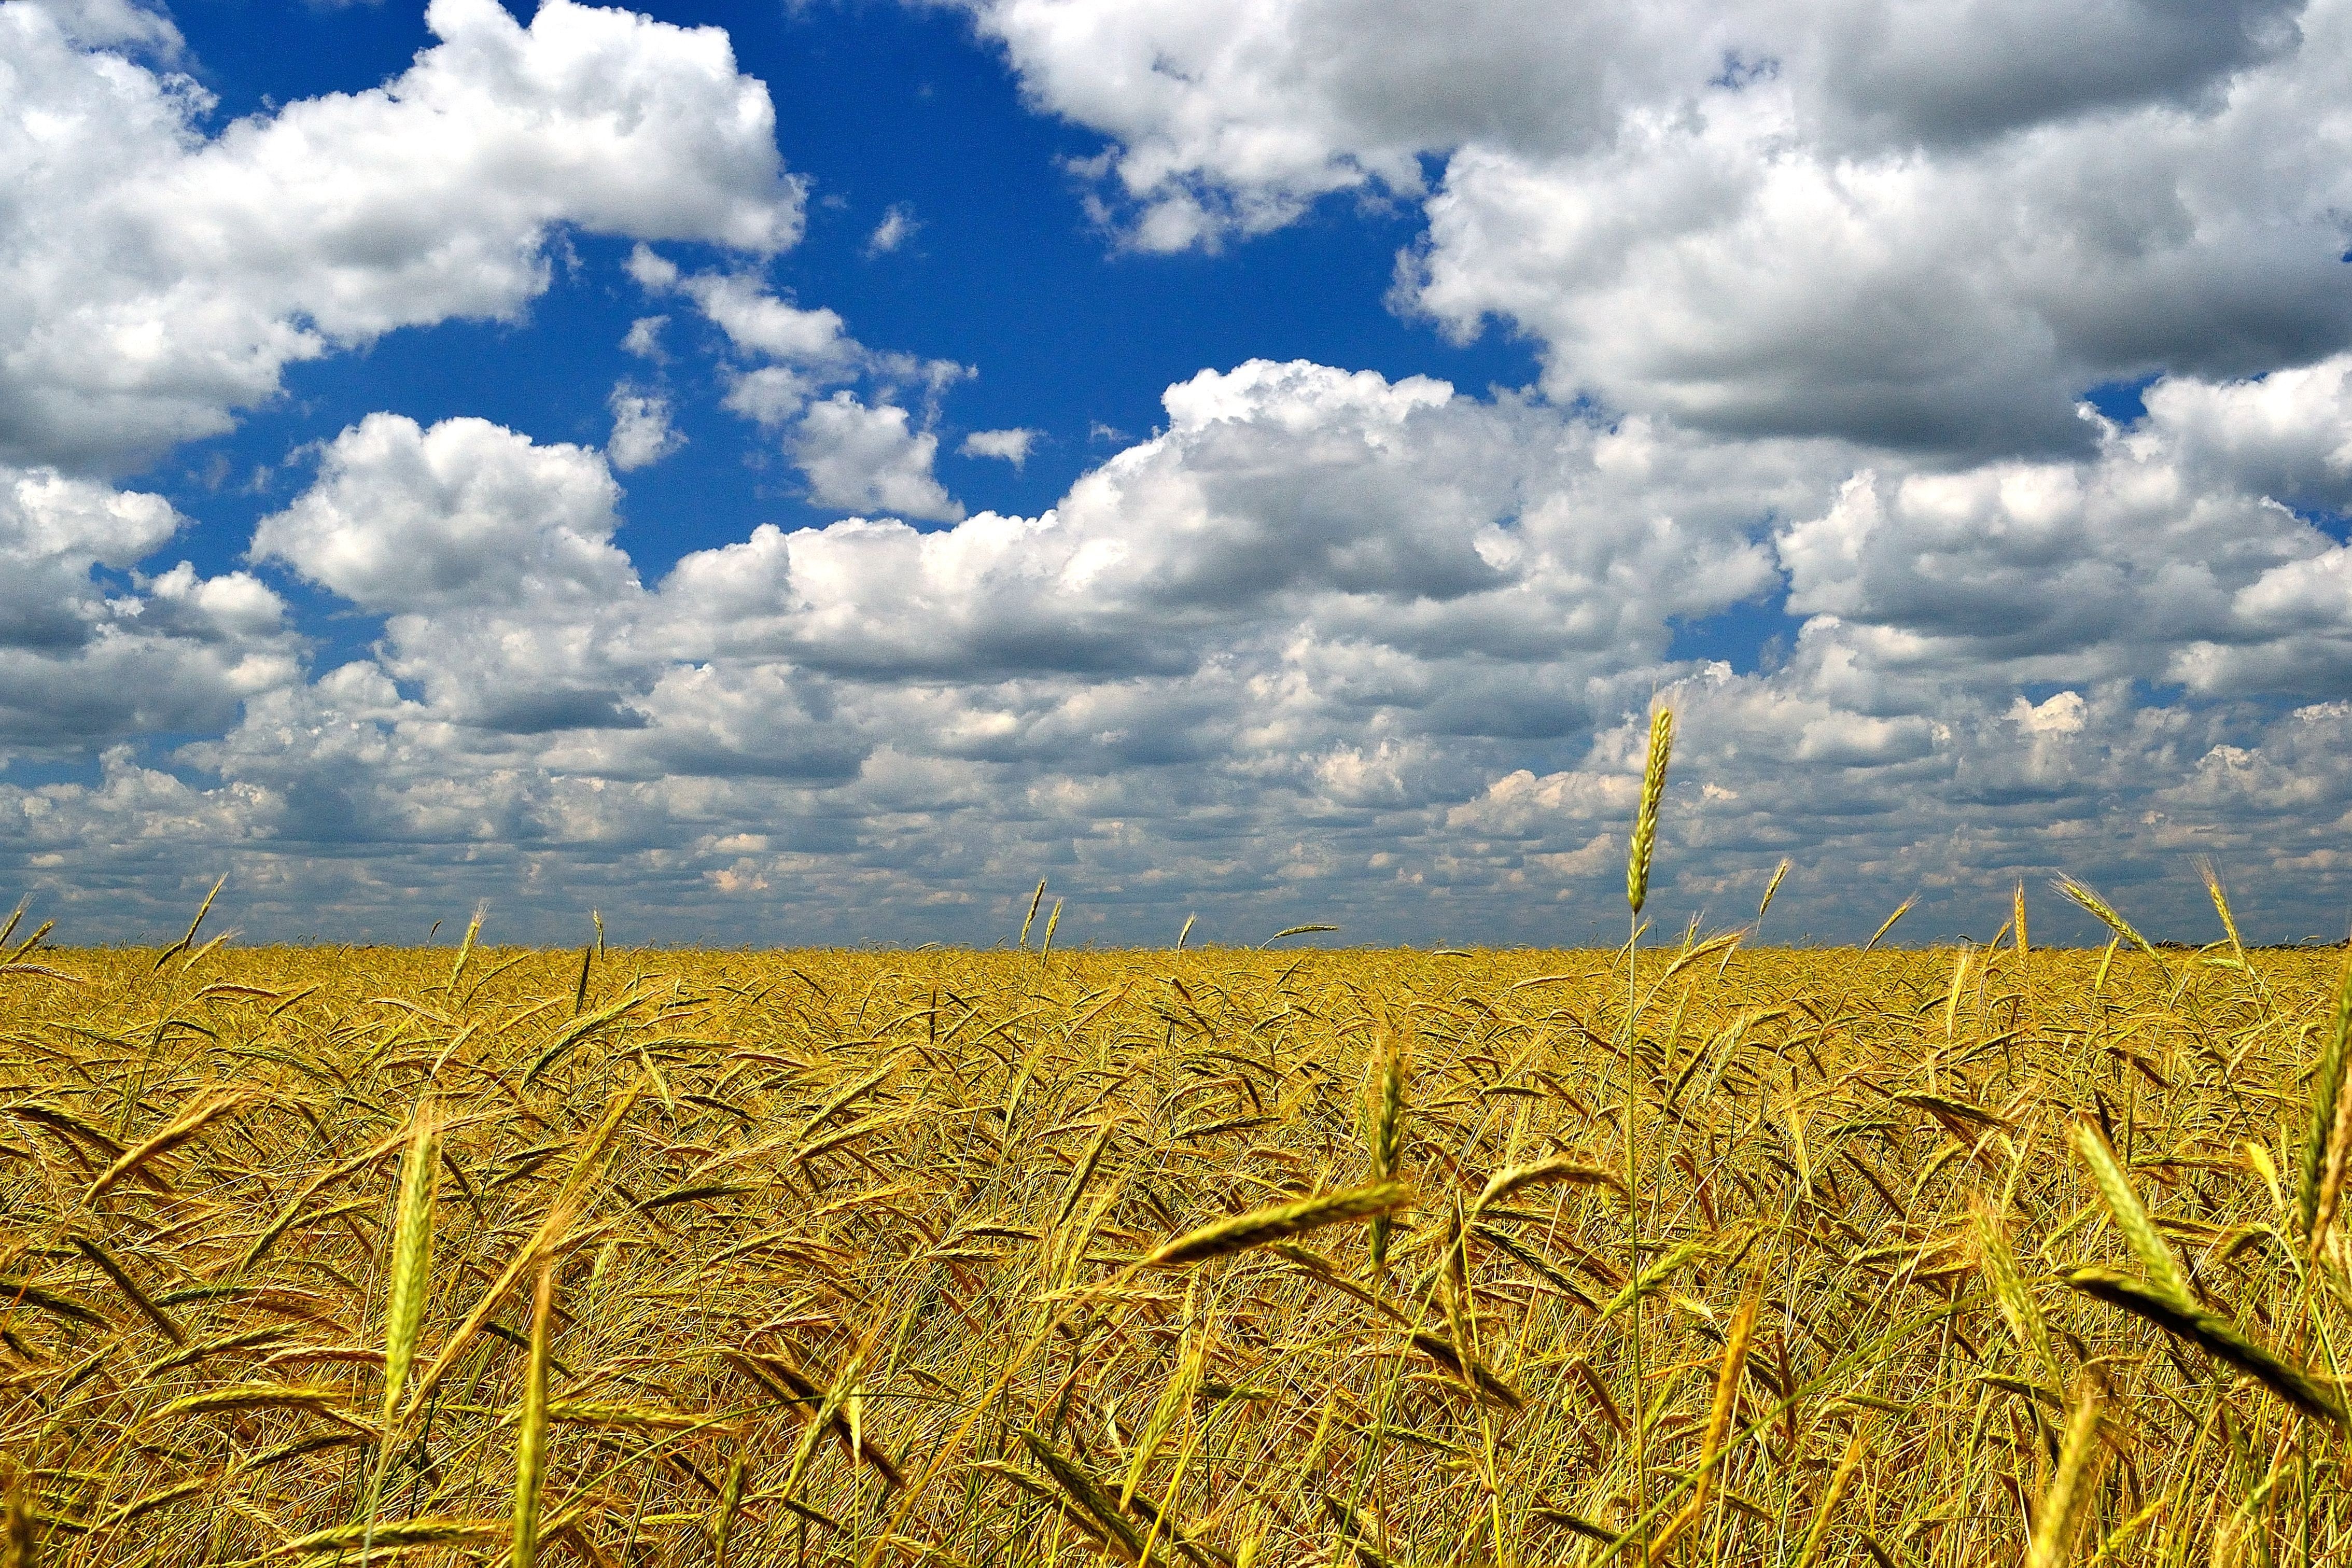 A field of wheat with a bright blue sky and clouds overhead.